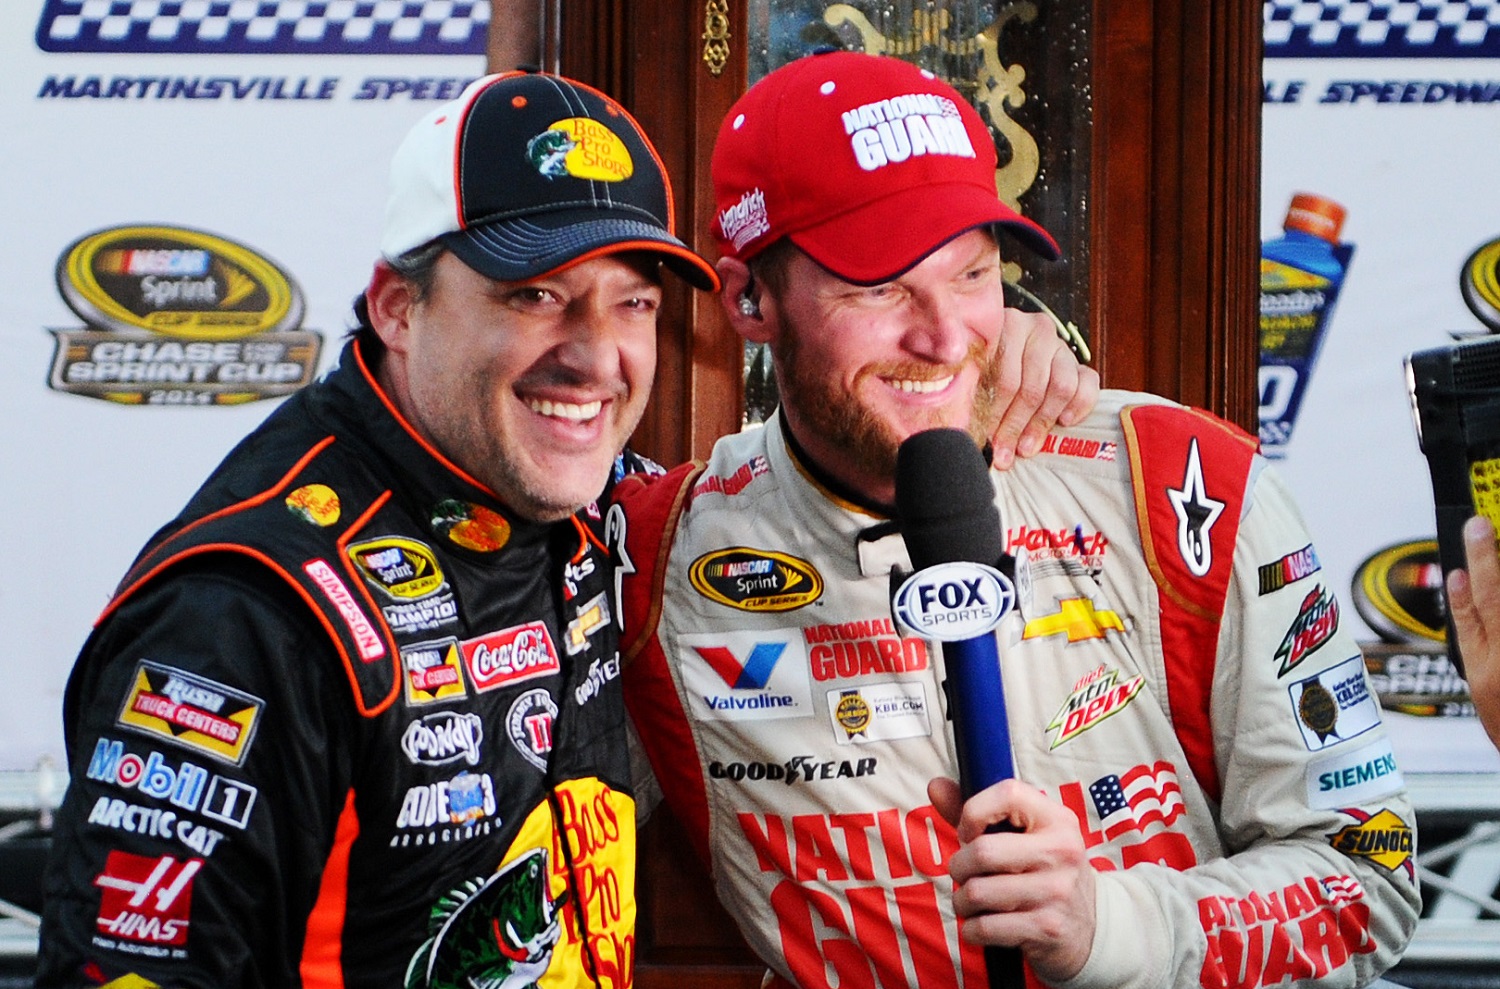 NASCAR Calls on Dale Earnhardt Jr., Tony Stewart, and Clint Bowyer to Shake Out the Next Gen Car